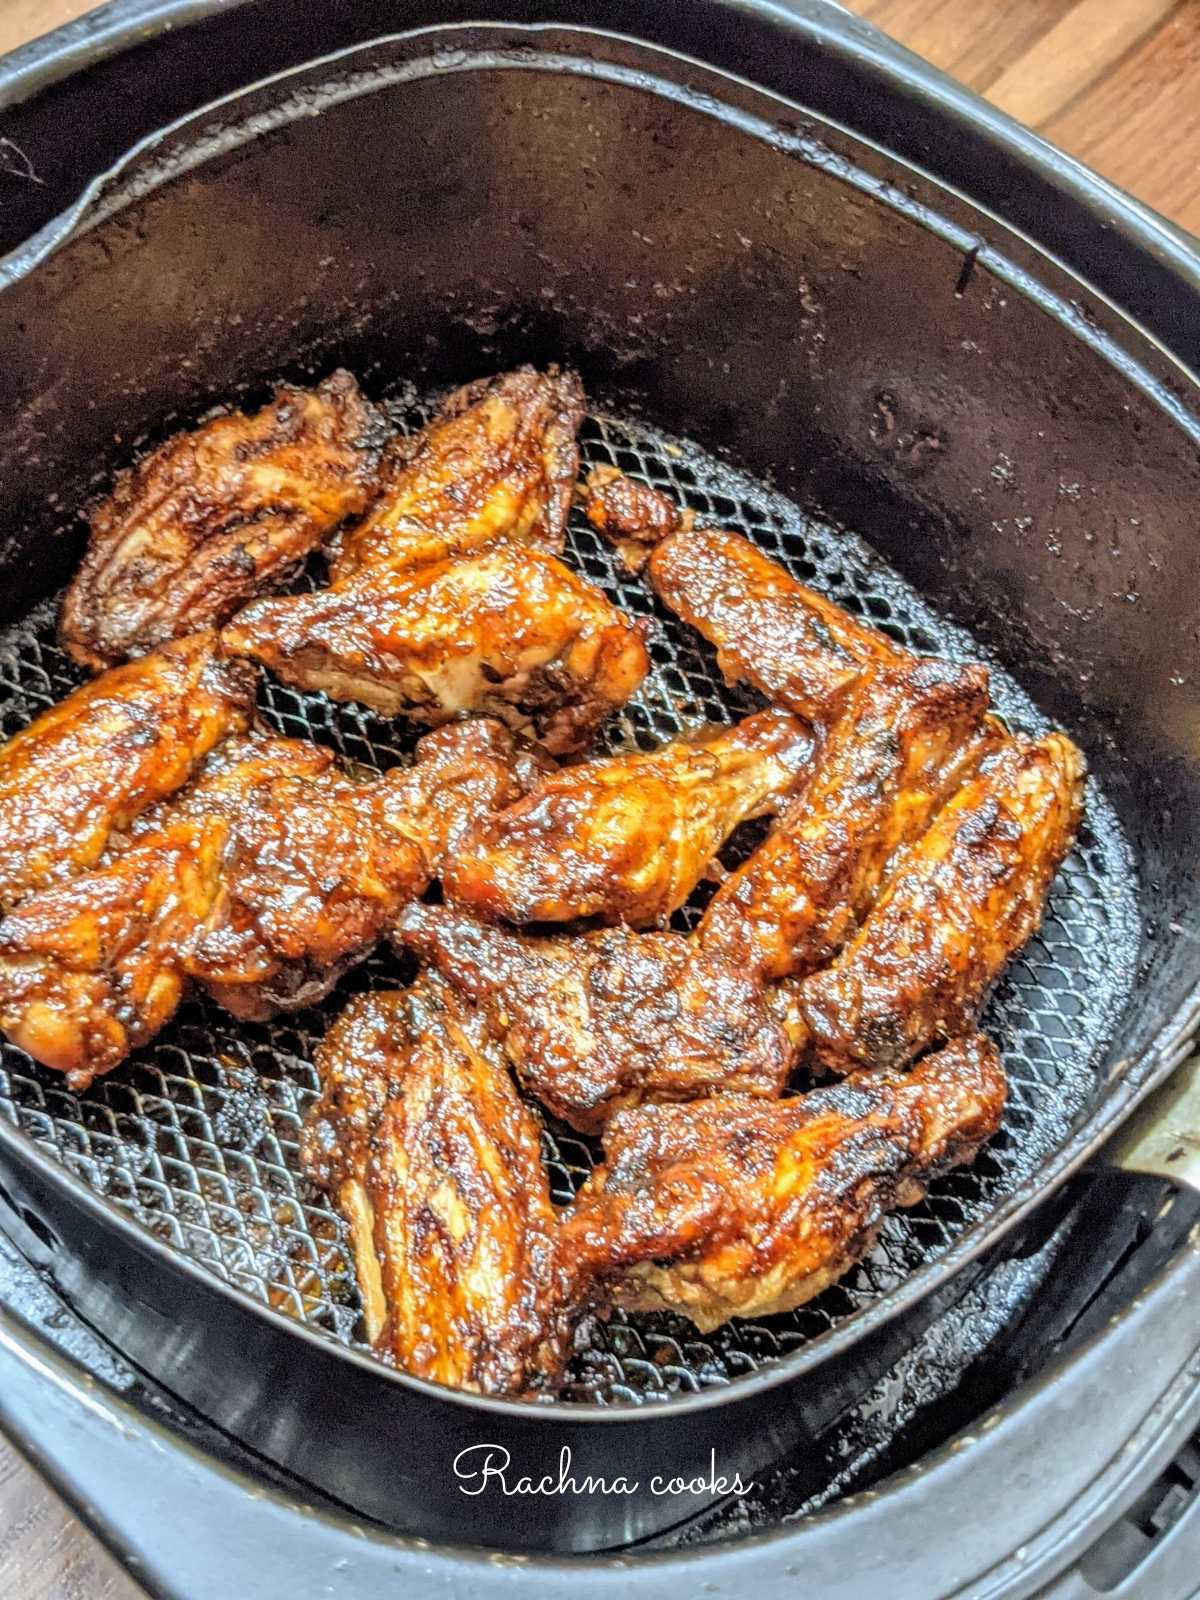 frozen bbq chicken wings air fried in the air fryer basket.